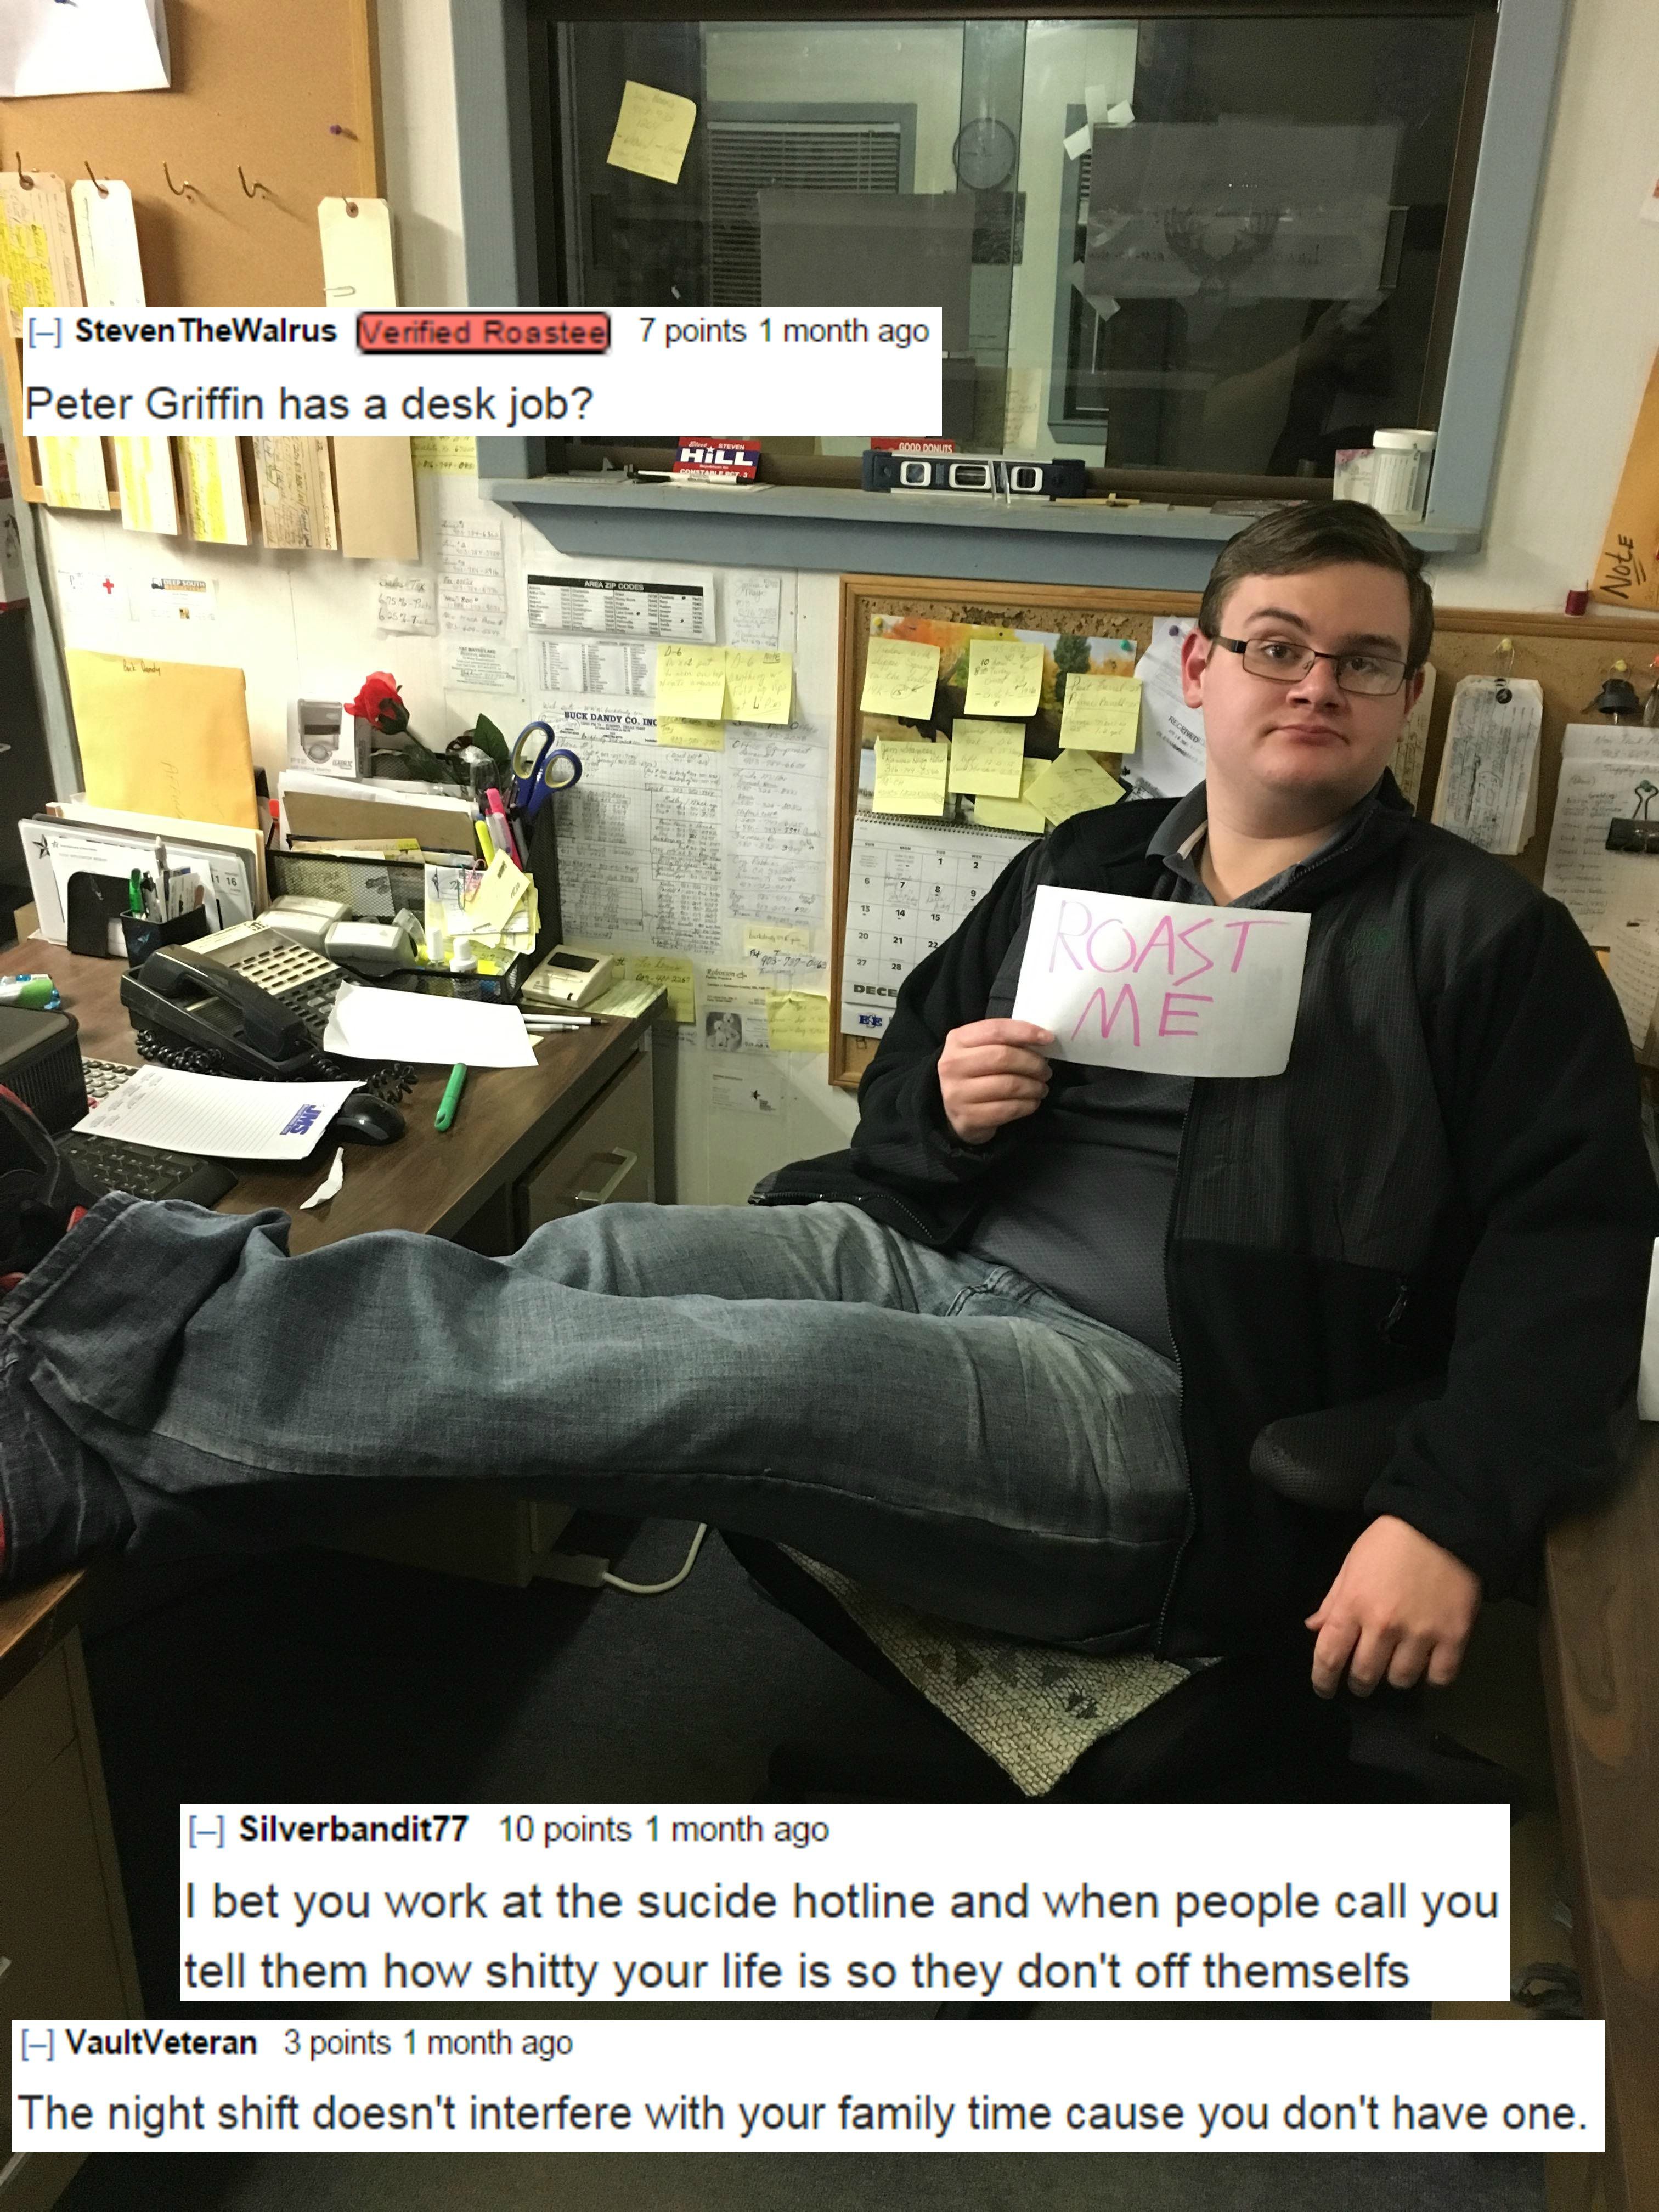 furniture - Tports 1 month ago Steven The Wal l Peter Griffin has a desk job? Di Nest Ne Silverbandit 77 10 points 1 month ago I bet you work at the sucide hotline and when people call you tell them how shitty your life is so they don't off themselfs HVau